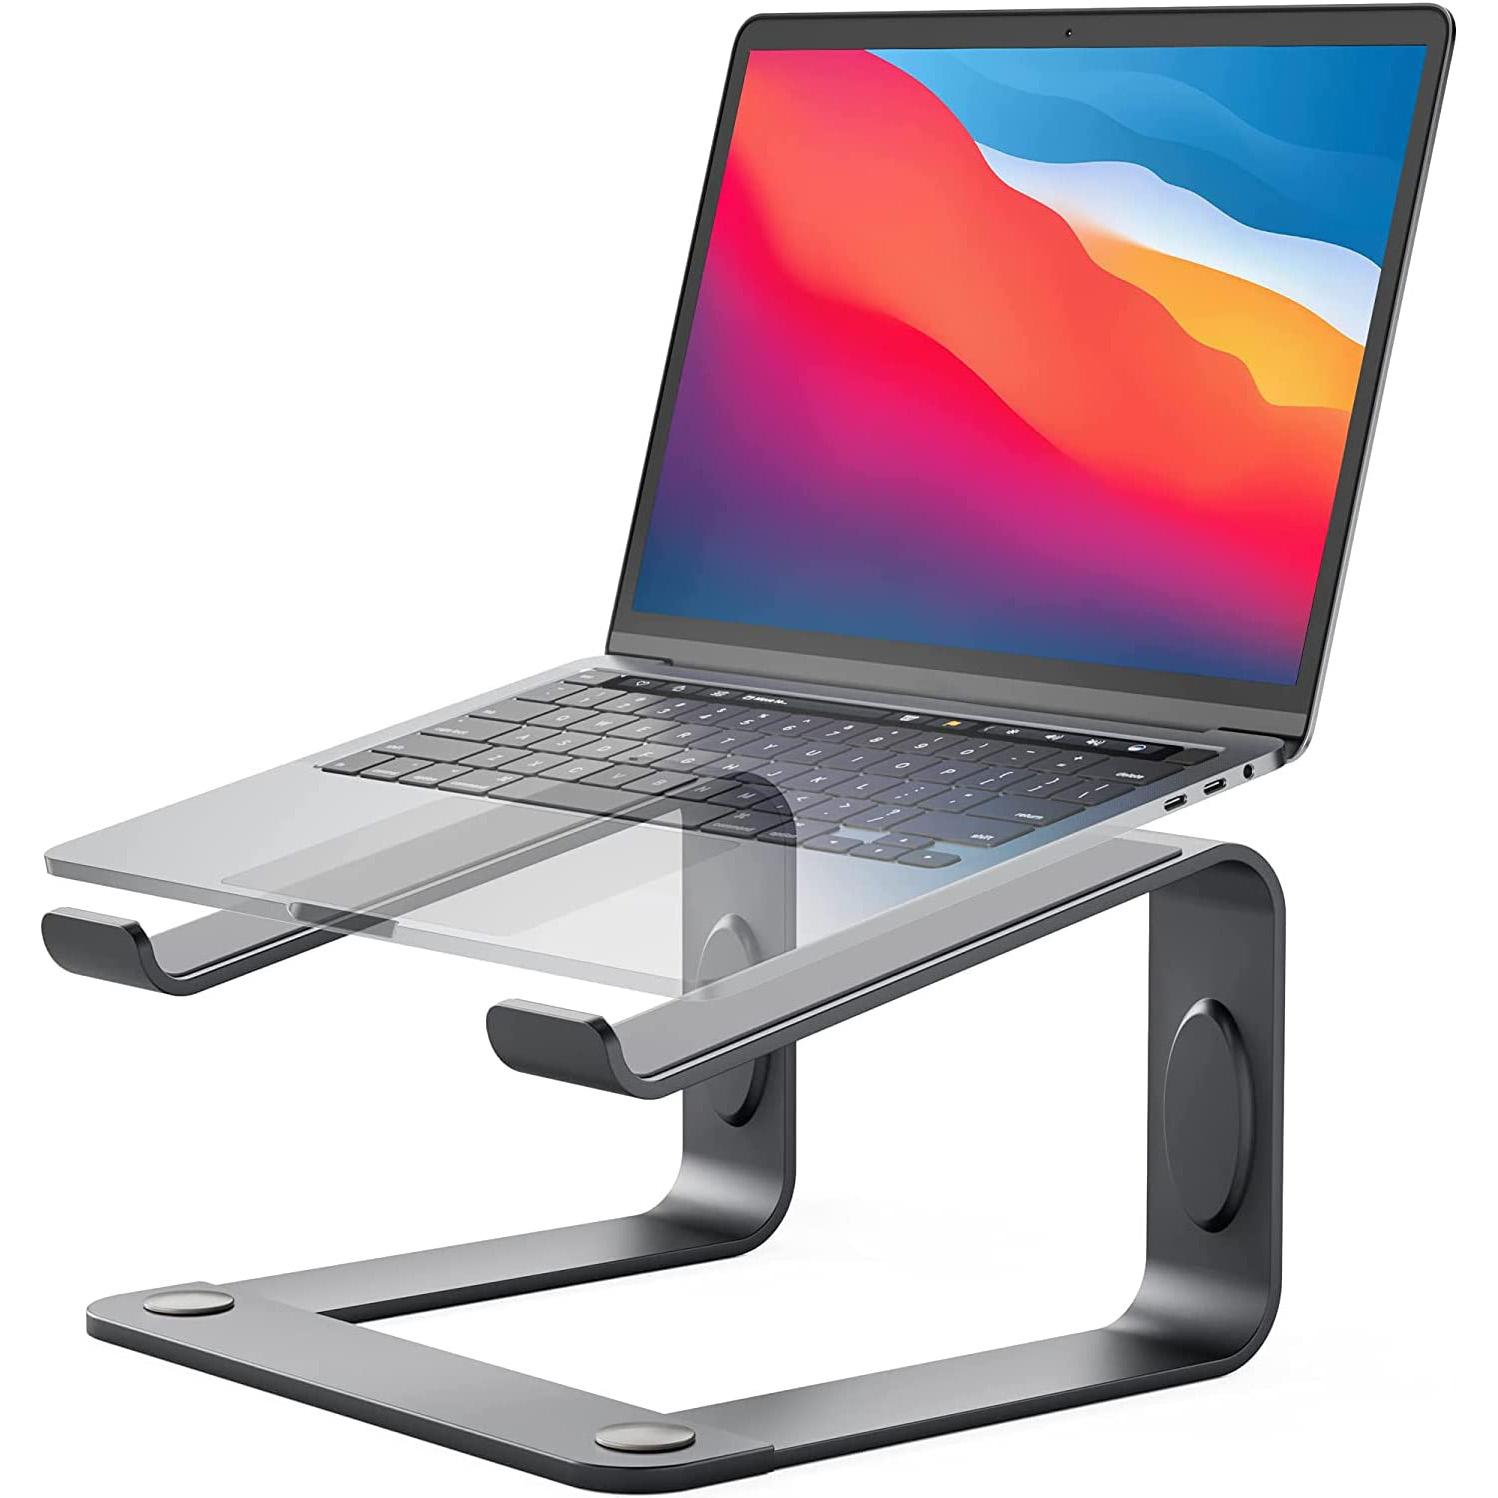 Laptop Riser Stand for $13.99